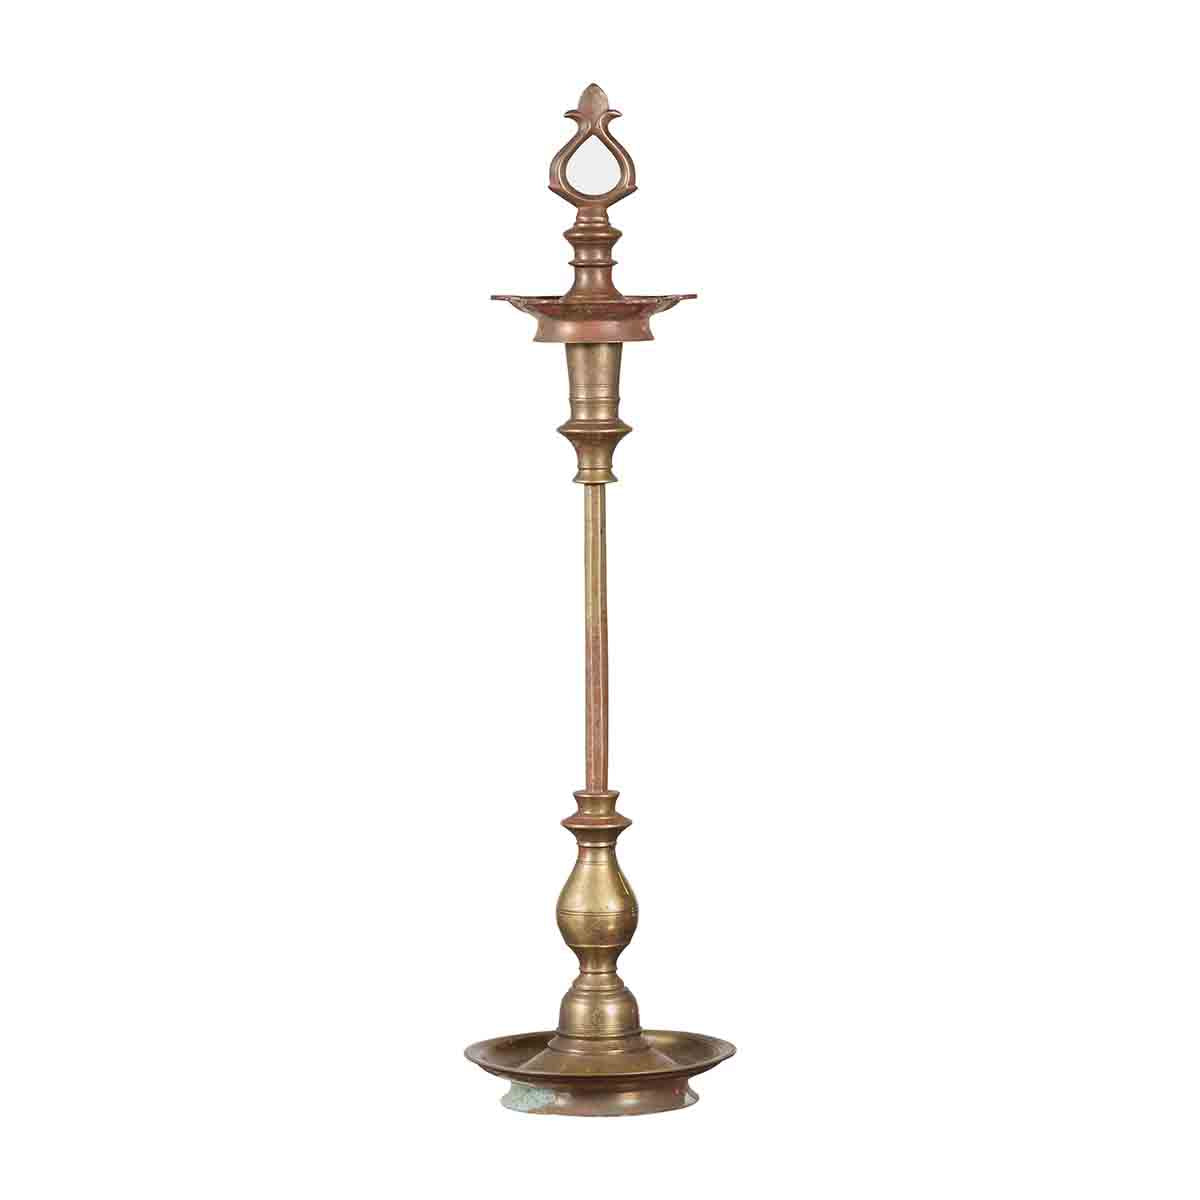 Buy Brass Pricket Candle Holders Set of 2, Vintage Religious Alter Holy  Family Candleholders 11.75 Online in India 